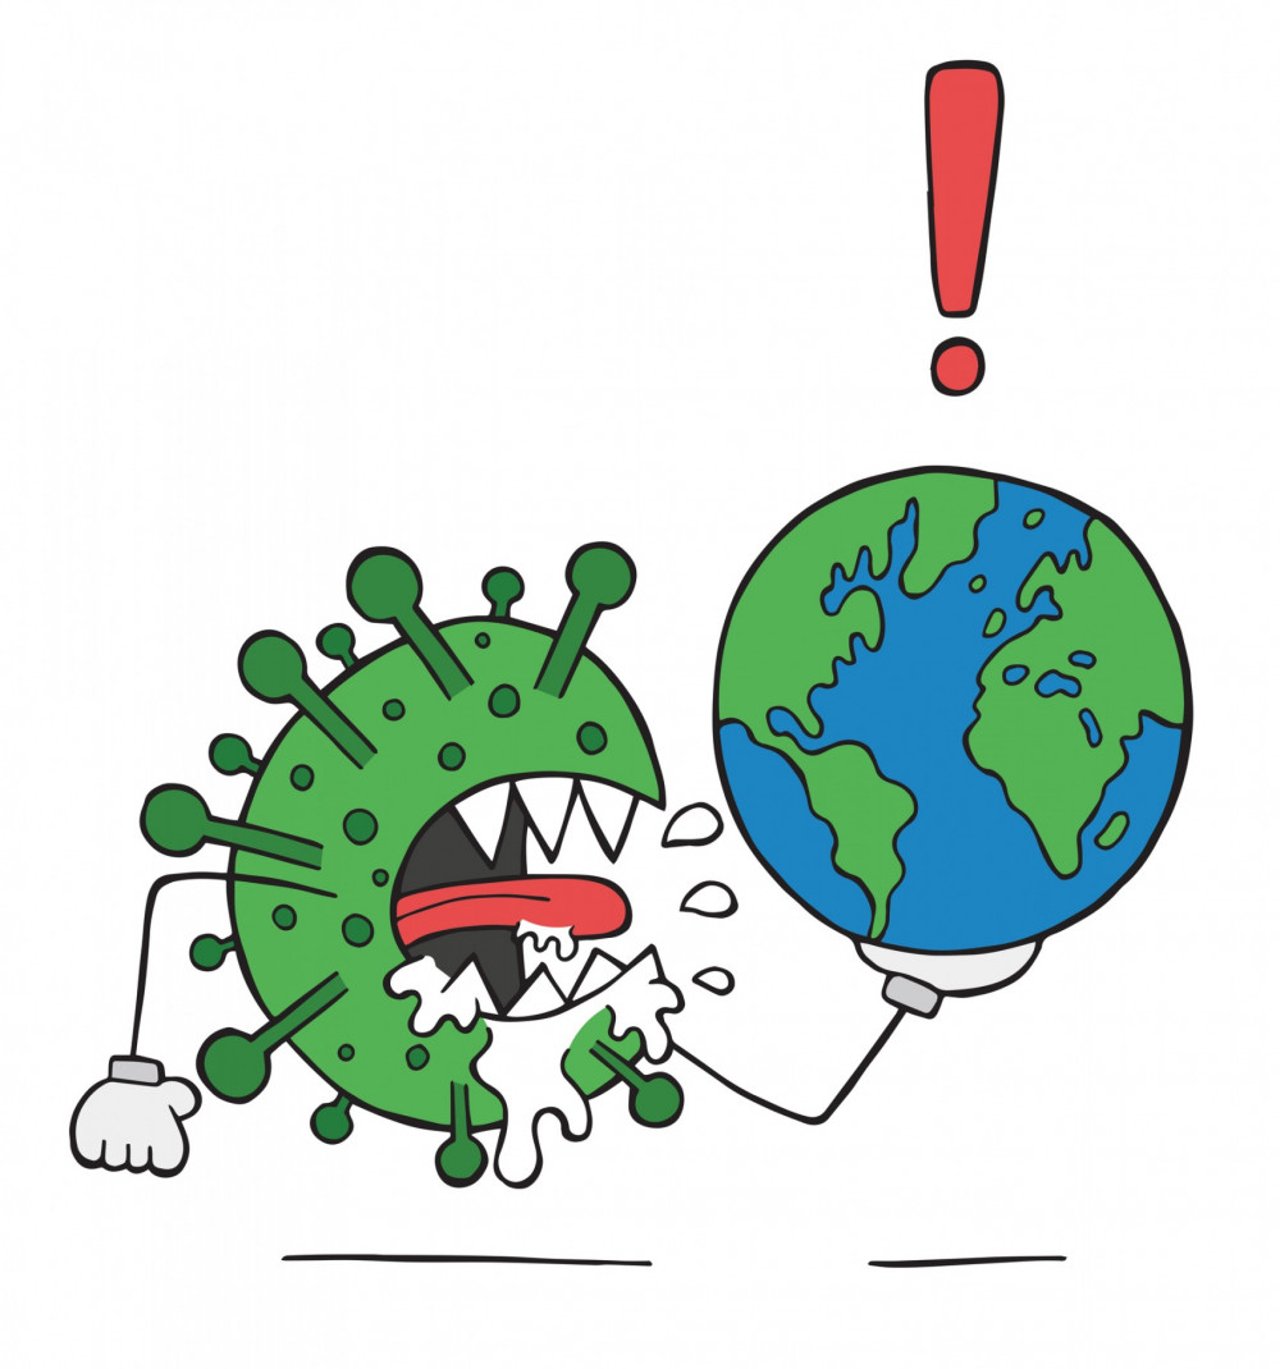 Coronavirus holding the planet earth and harming it 